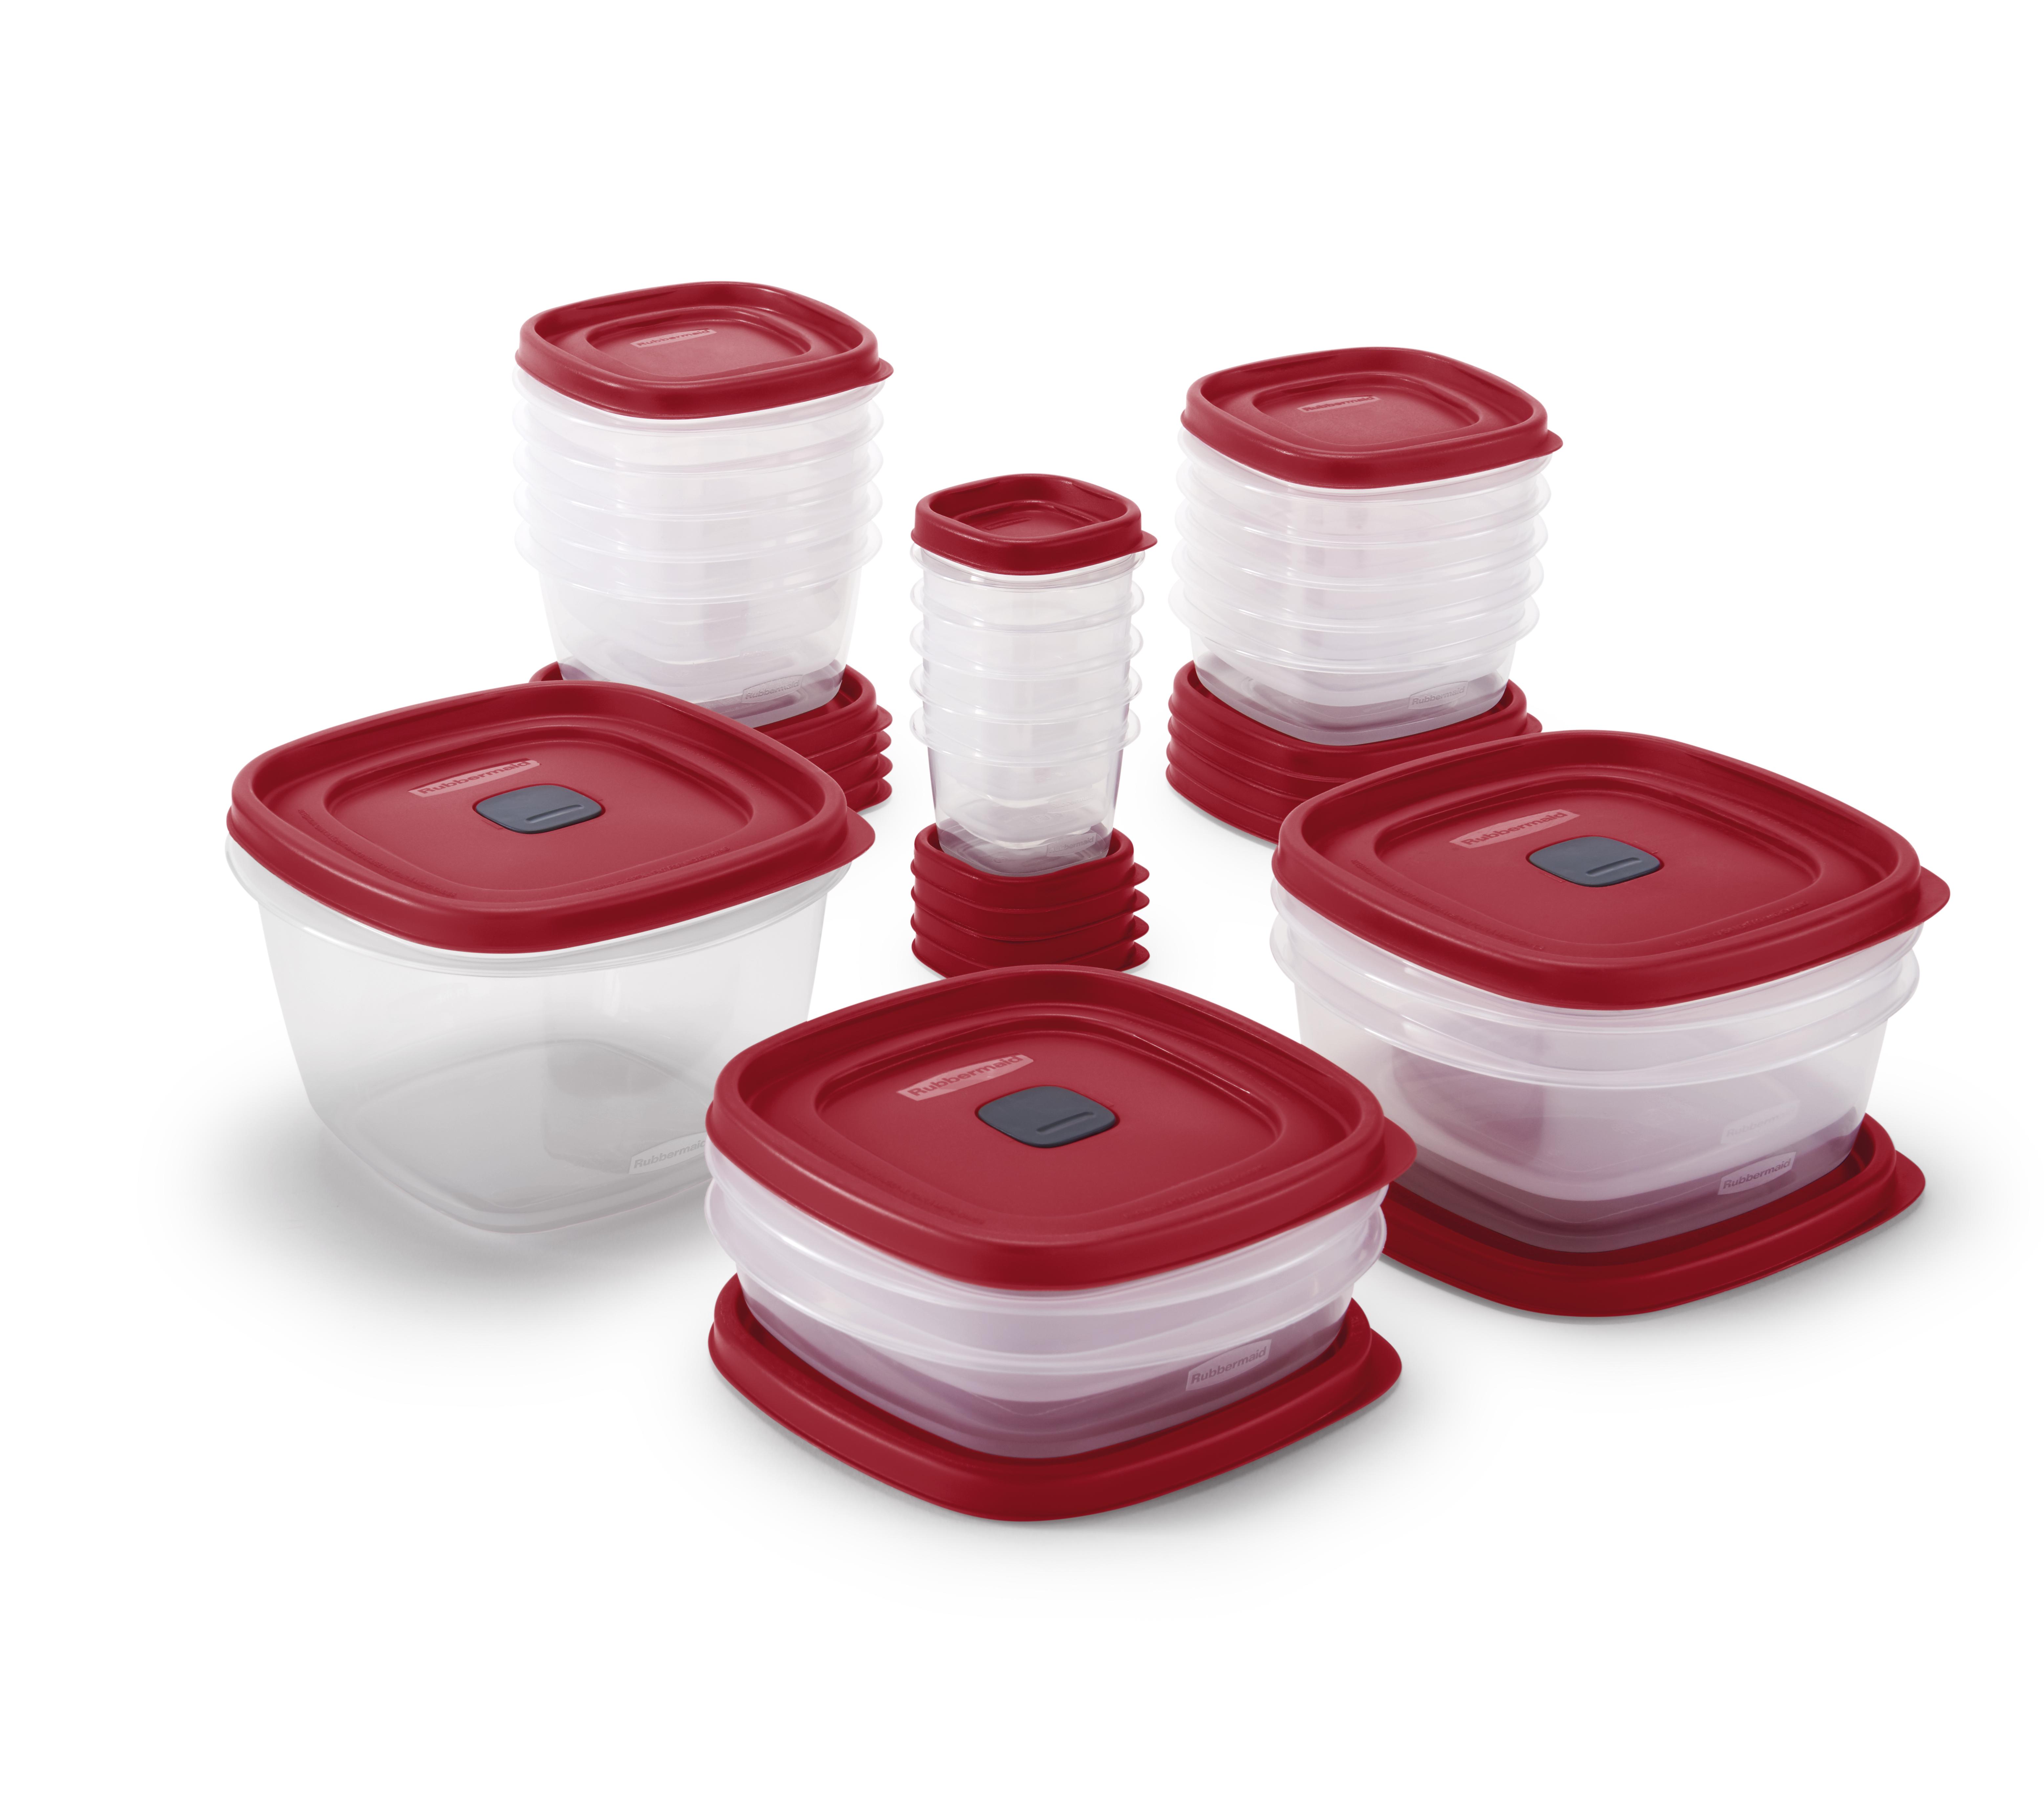 Rubbermaid, Easy Find Lid Food Storage Containers with Vented Lids, 40-Piece Set - image 1 of 8